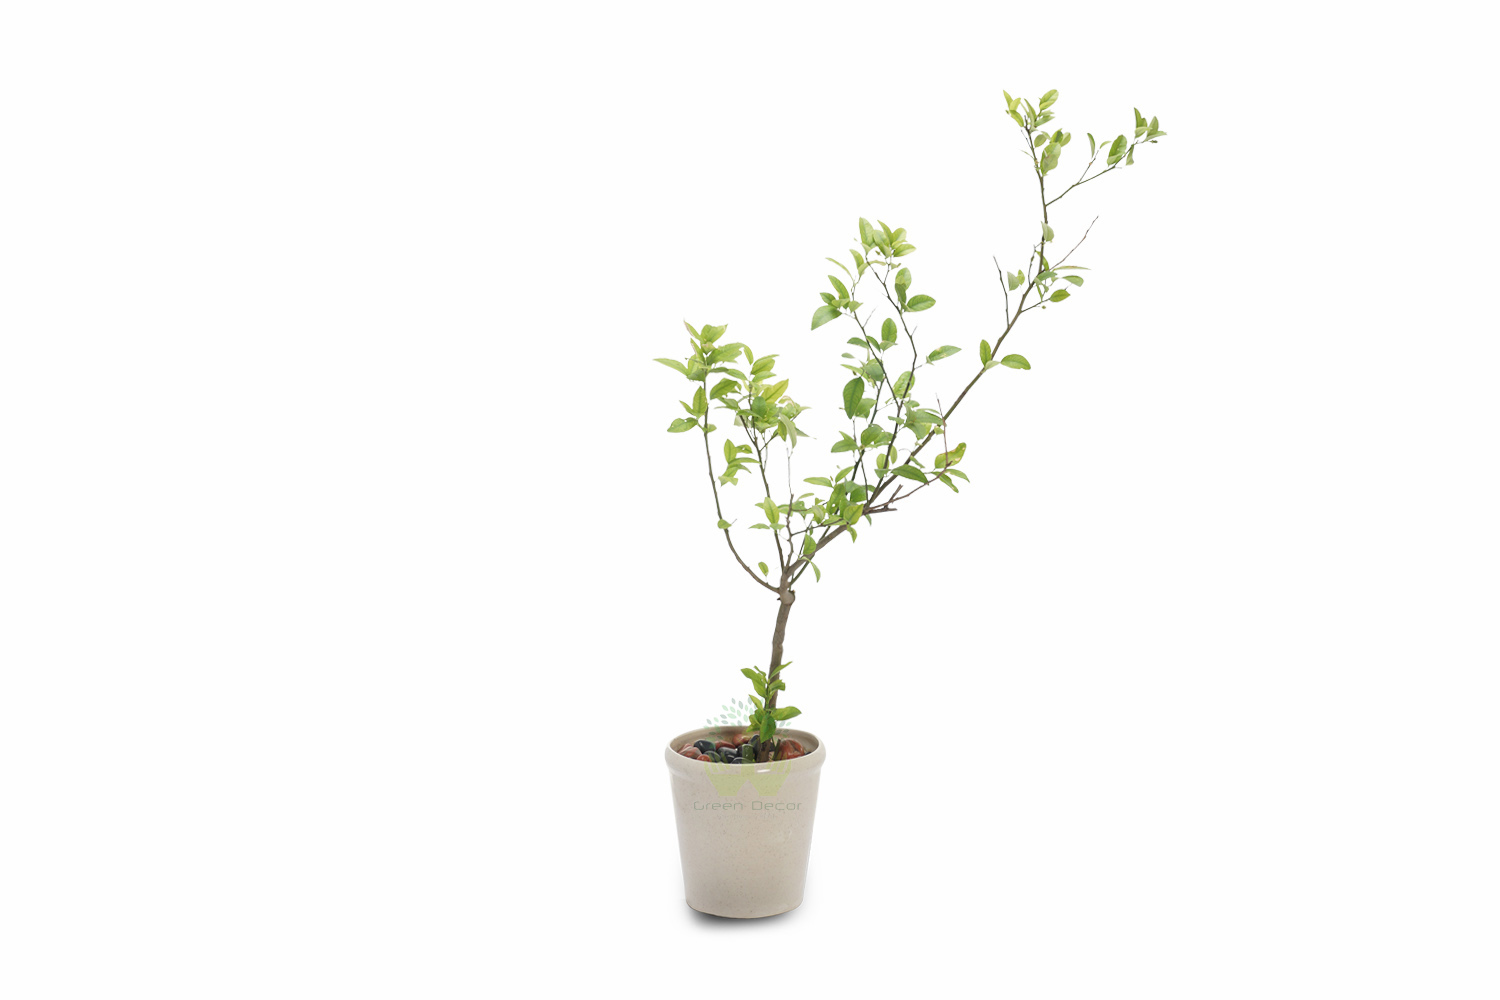 Buy Orange Plants , White Pots and seeds in Delhi NCR by the best online nursery shop Greendecor.